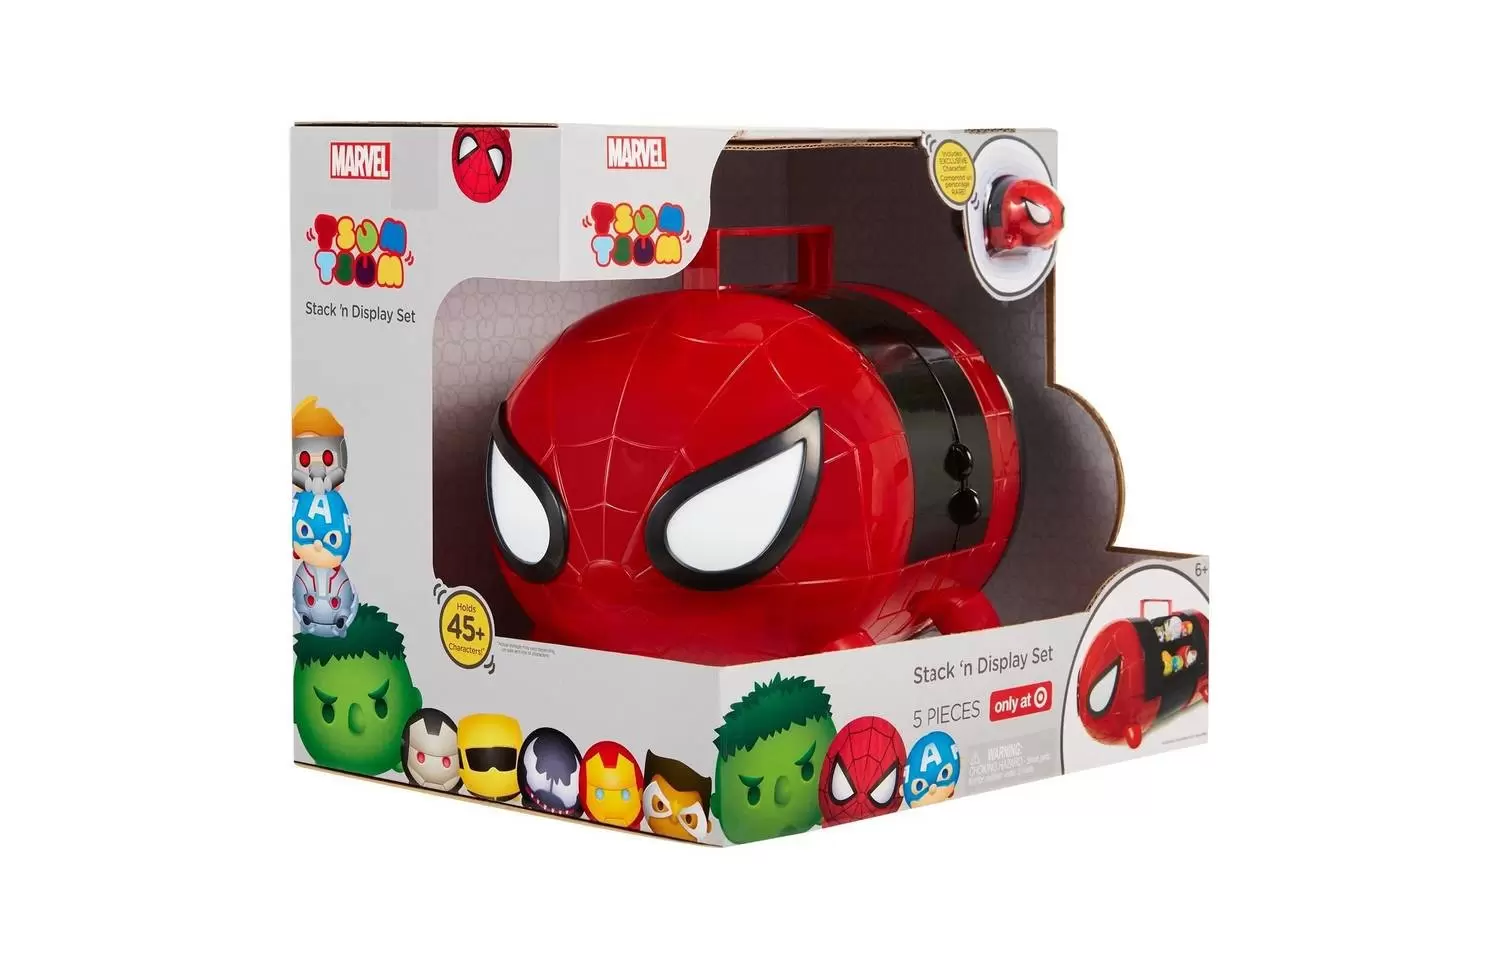 Tsum Tsum Jakks Pacific Exclusive And Sets - Spider-Man Black and Red Stack N Display Case